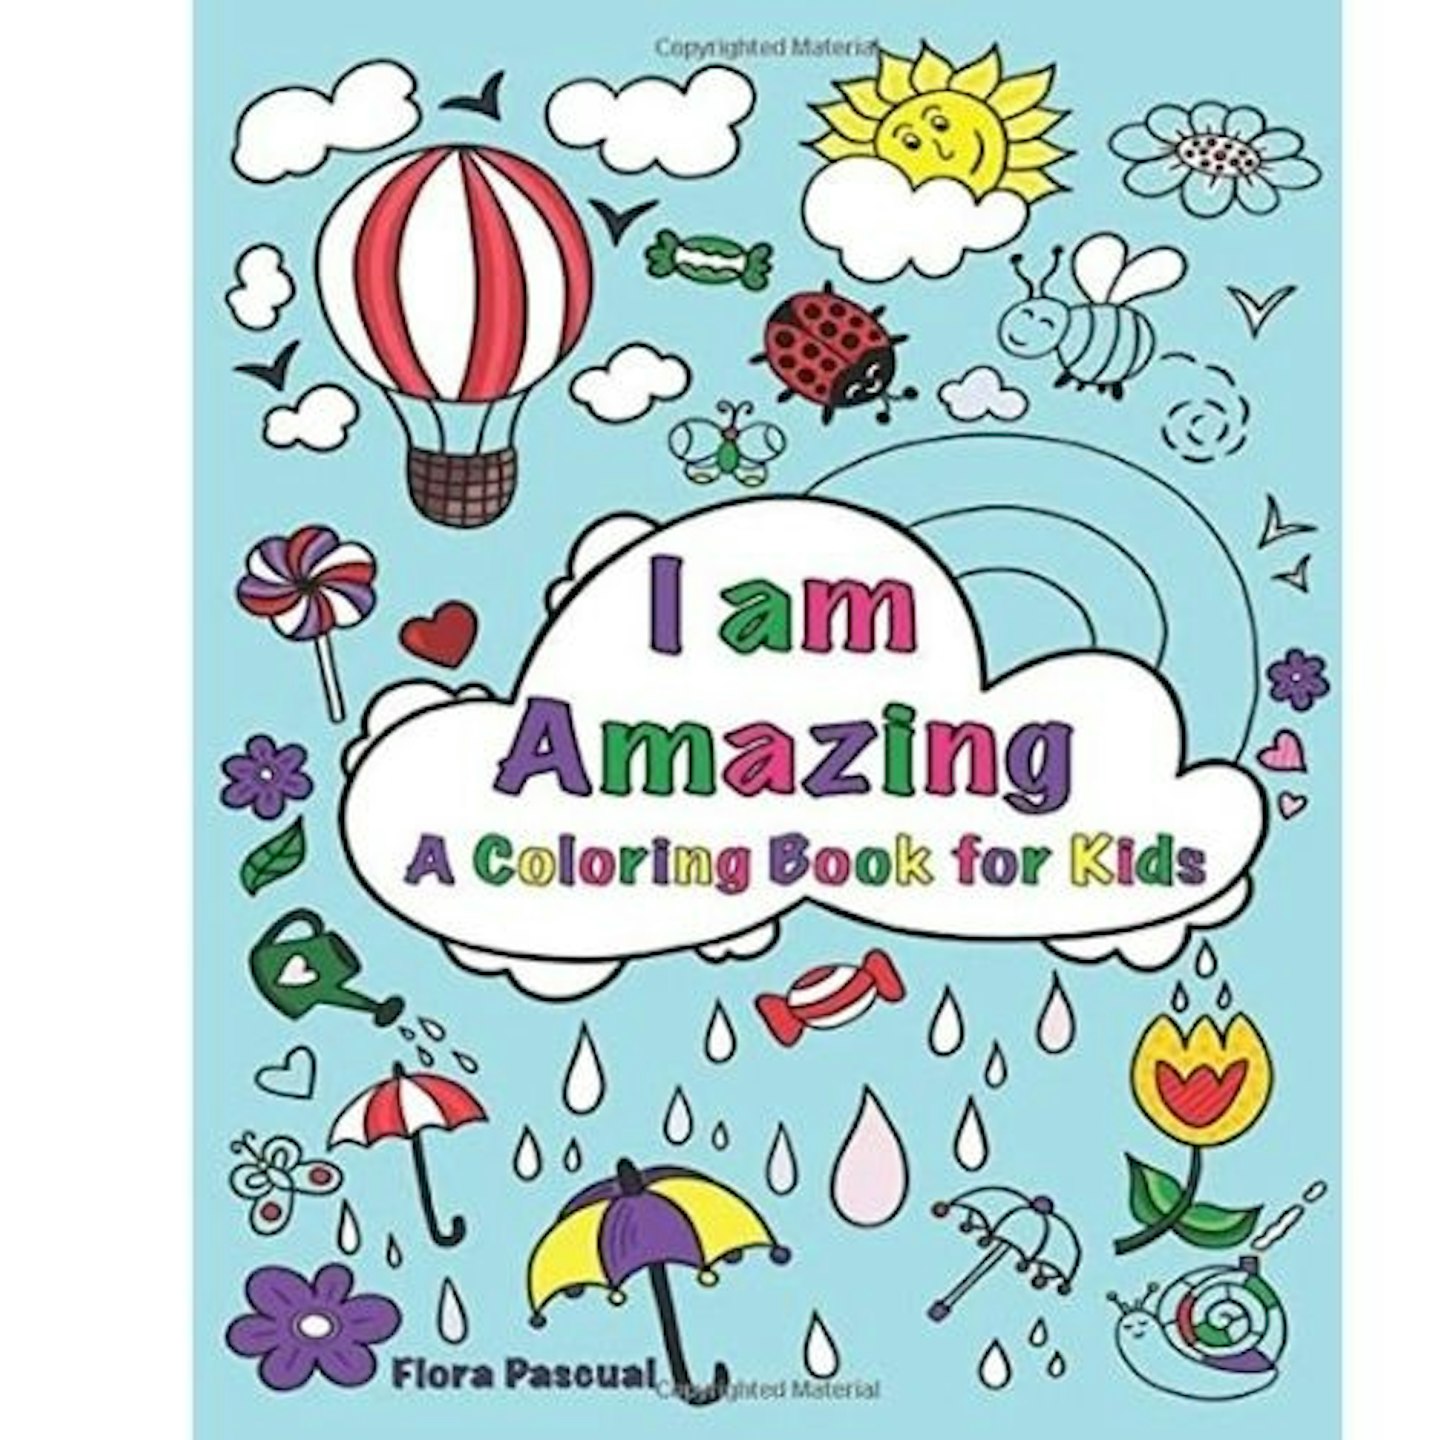 I am Amazing: A Colouring Book for Kids